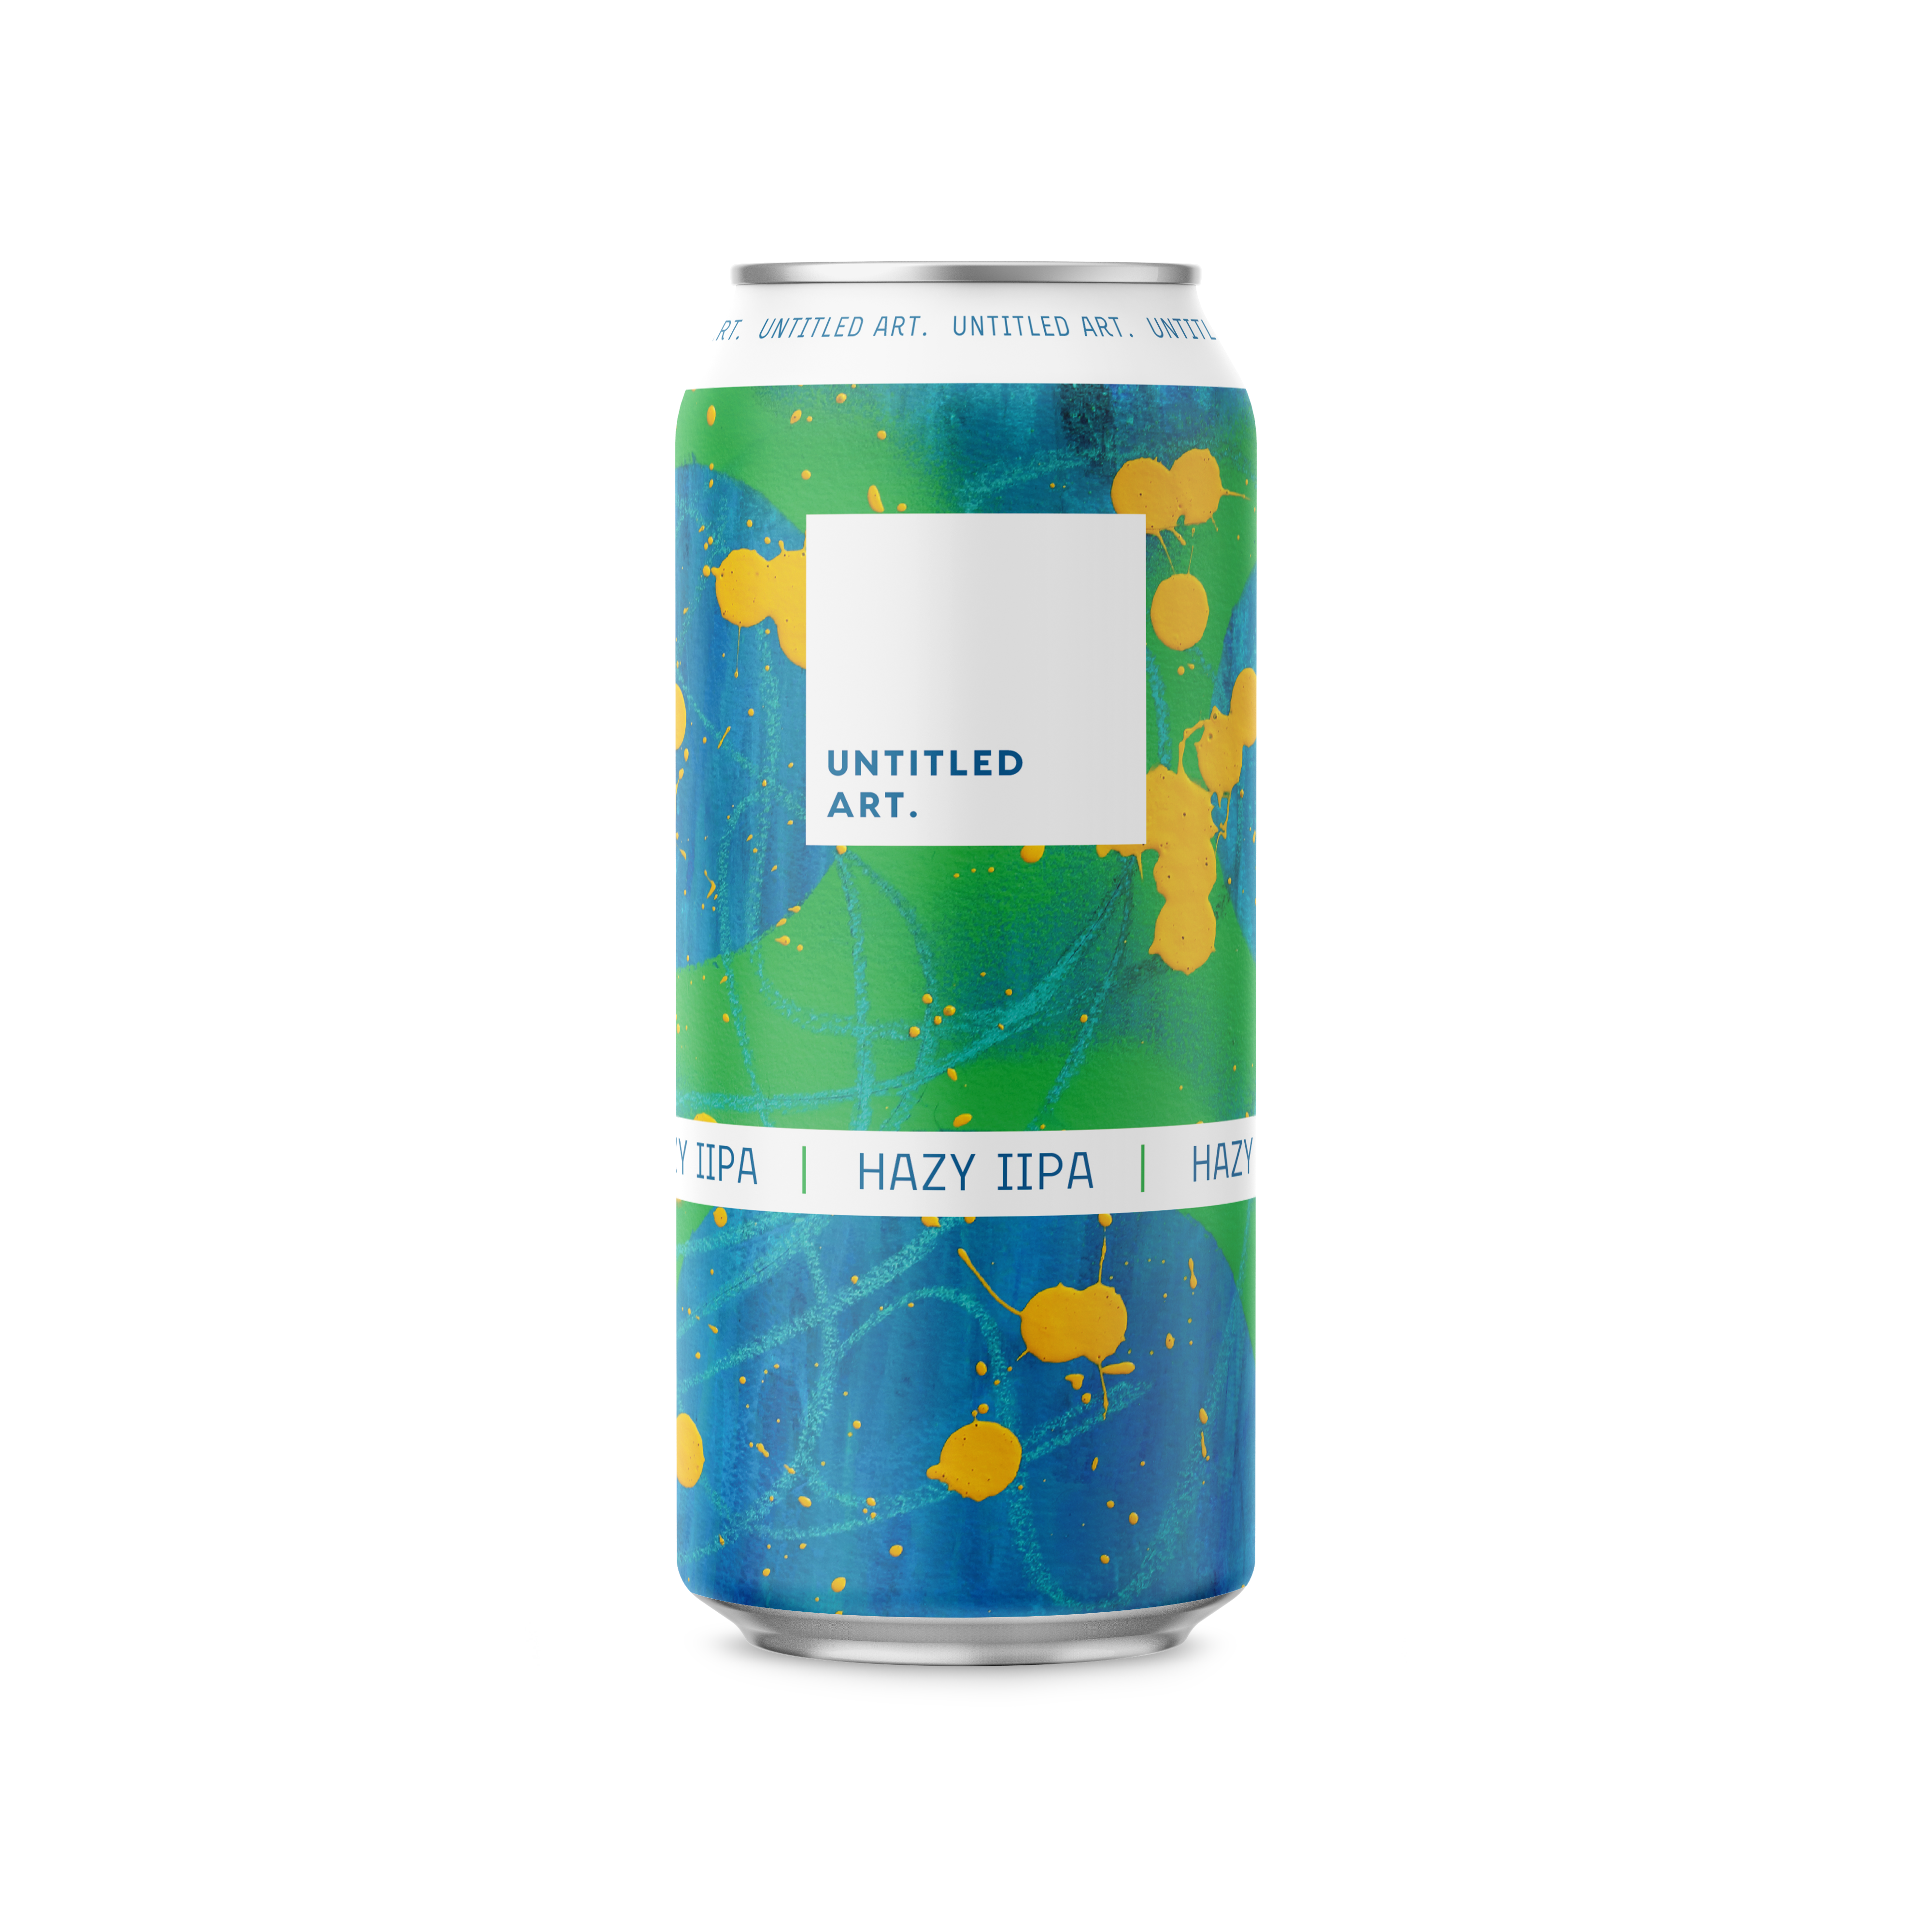 A can with a blue and yellow design on it.